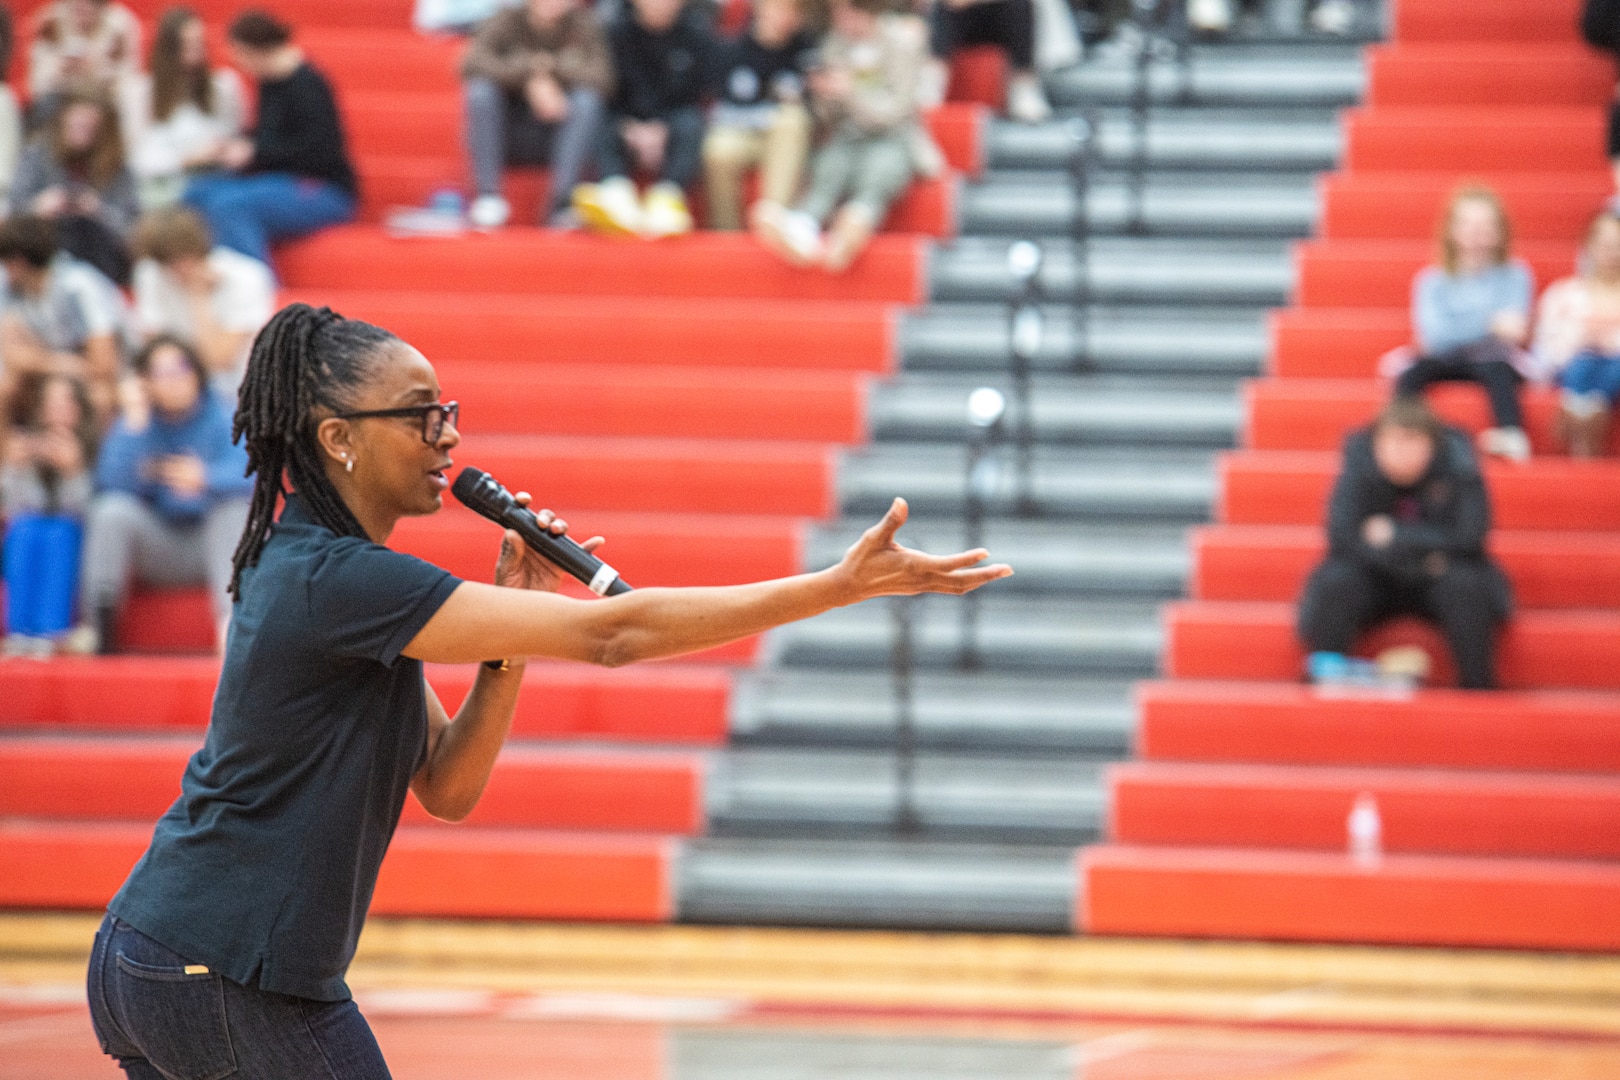 U.S. Air Force Tech. Sgt. (Ret.) Felika LaRock, Flight One vocalist from Band of Flight, Wright-Patterson Air Force Base, Ohio, sings to the audience at Holly High School, Michigan